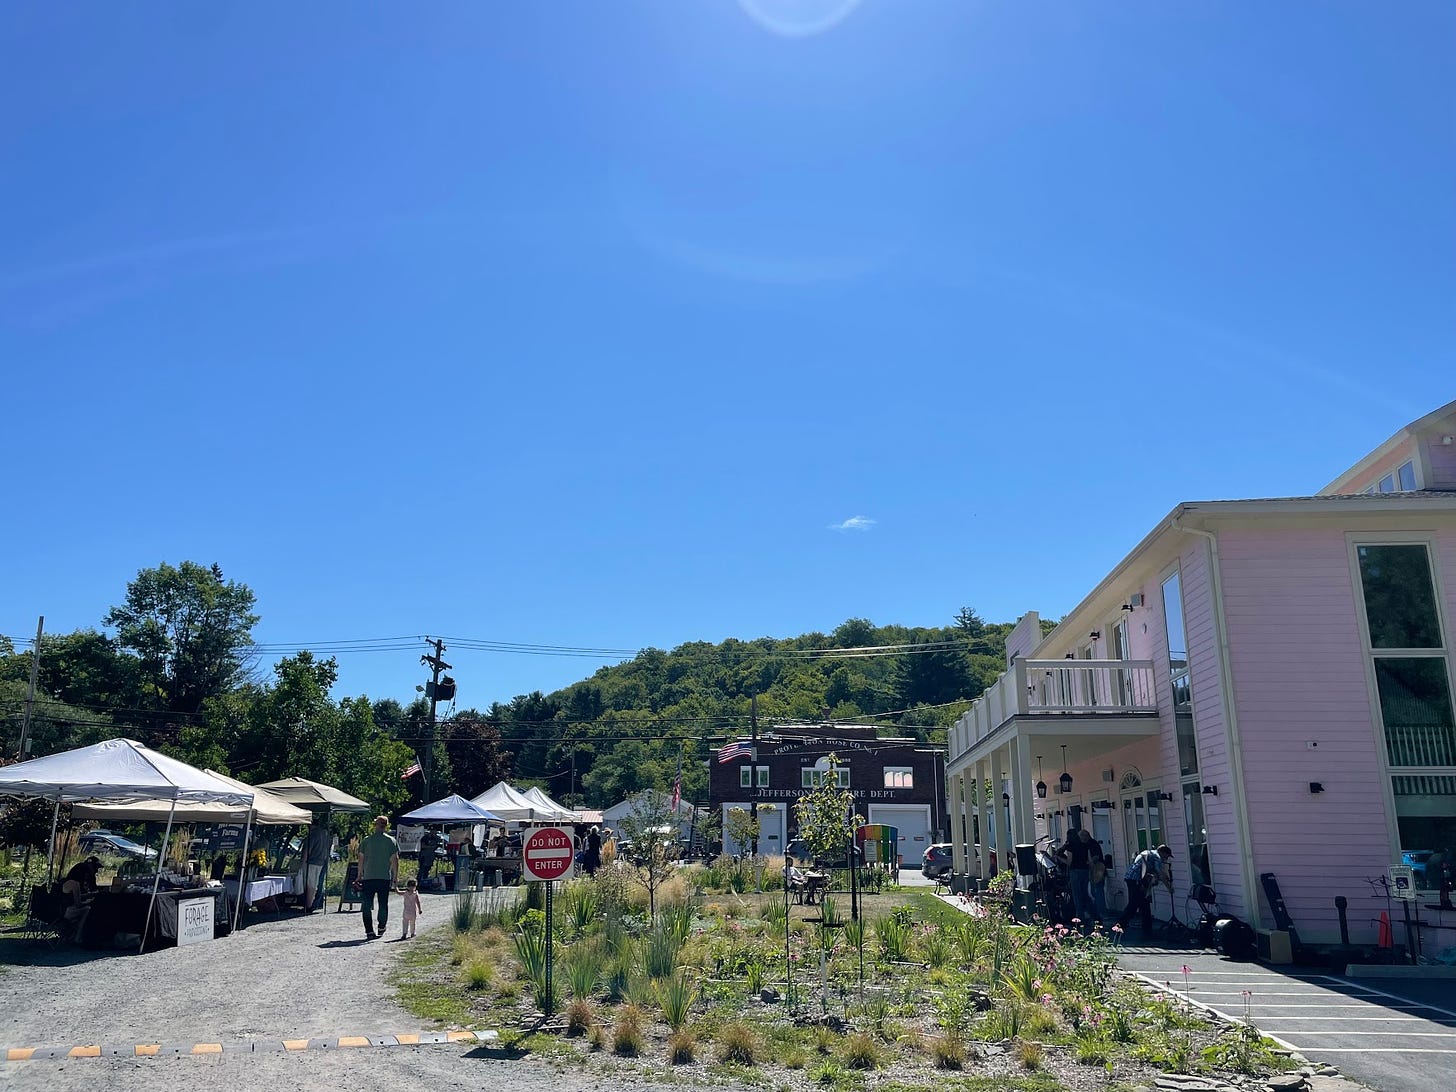 A farmer's market in a parking lot, behind which green hills can be seen